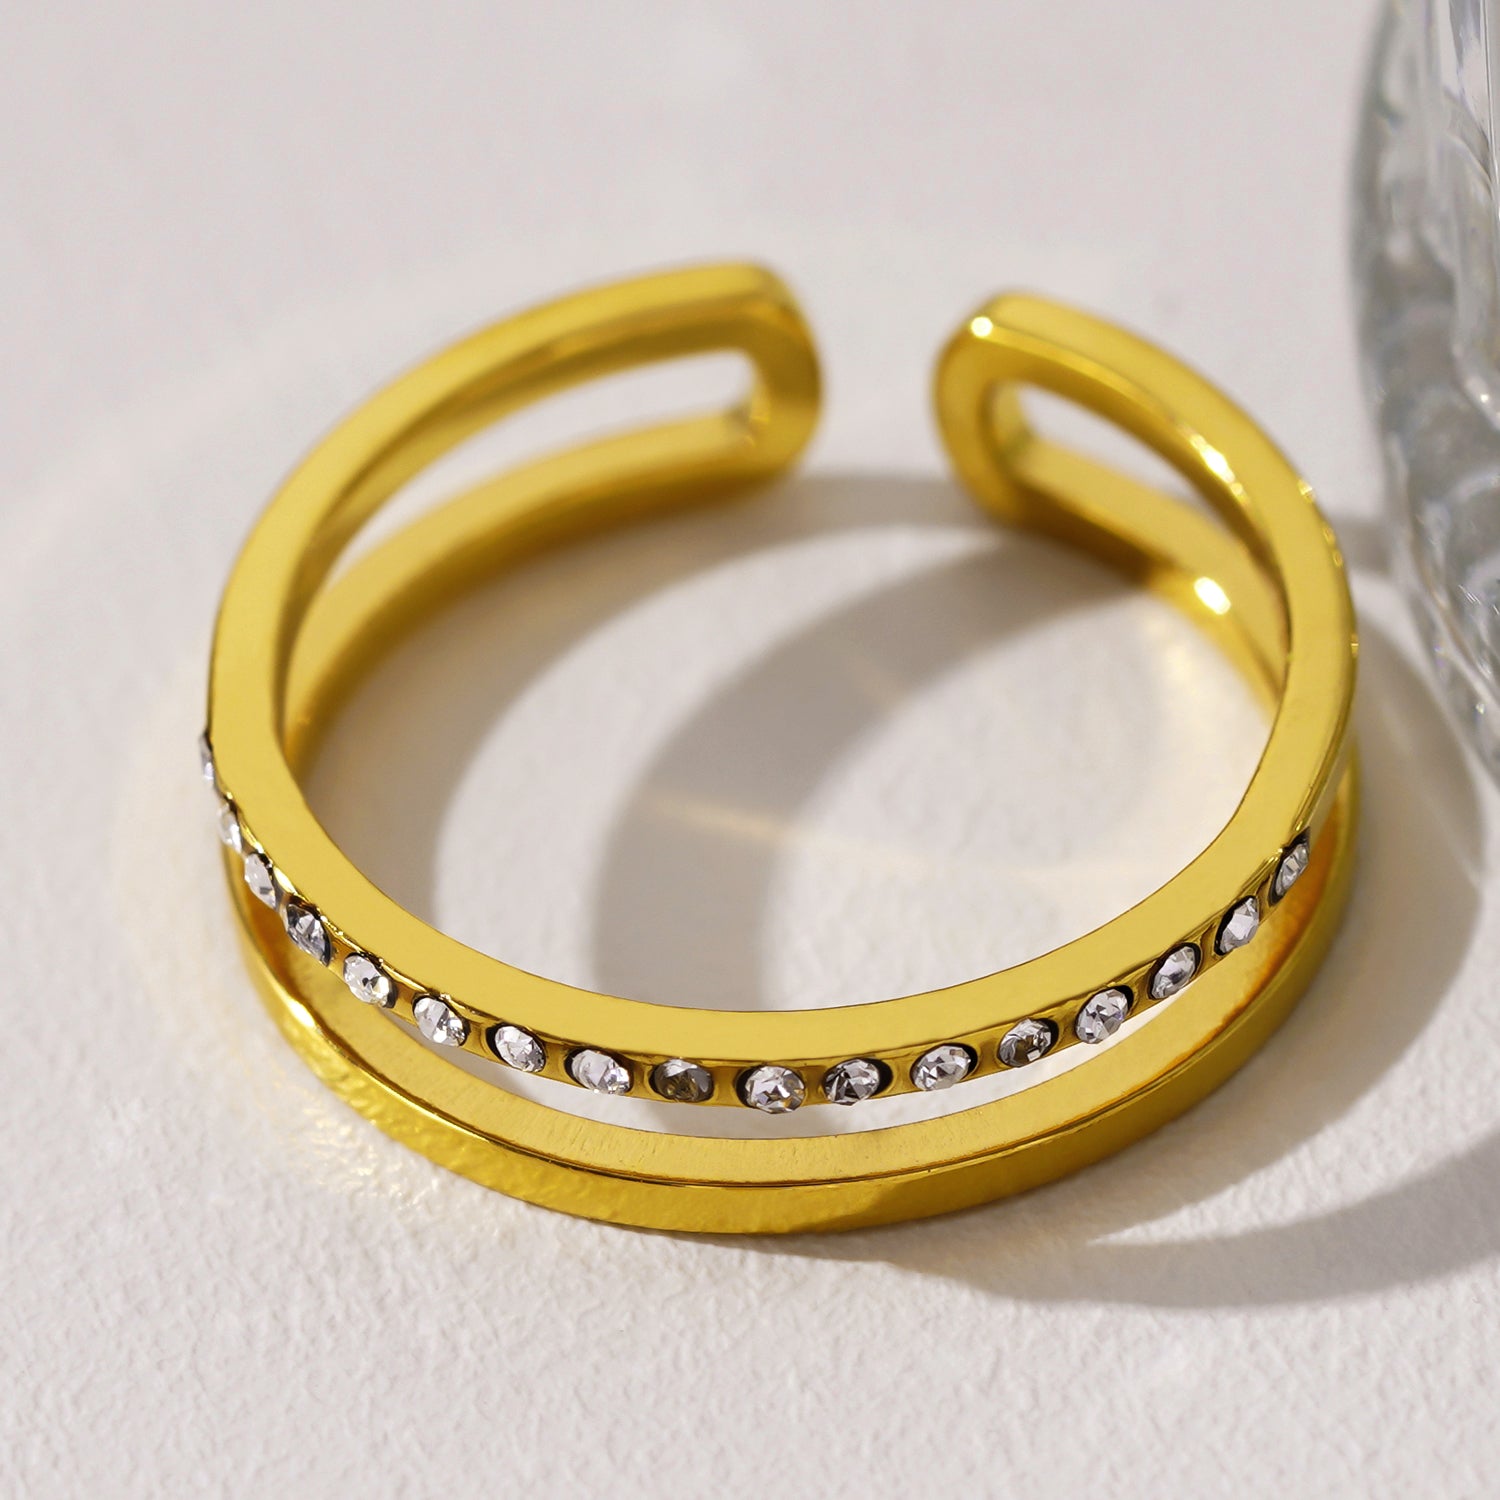 Style AIZA 4027: Twin Banded Ring with Pavé Zirconia & Smooth Finish Contrasting Surfaces.